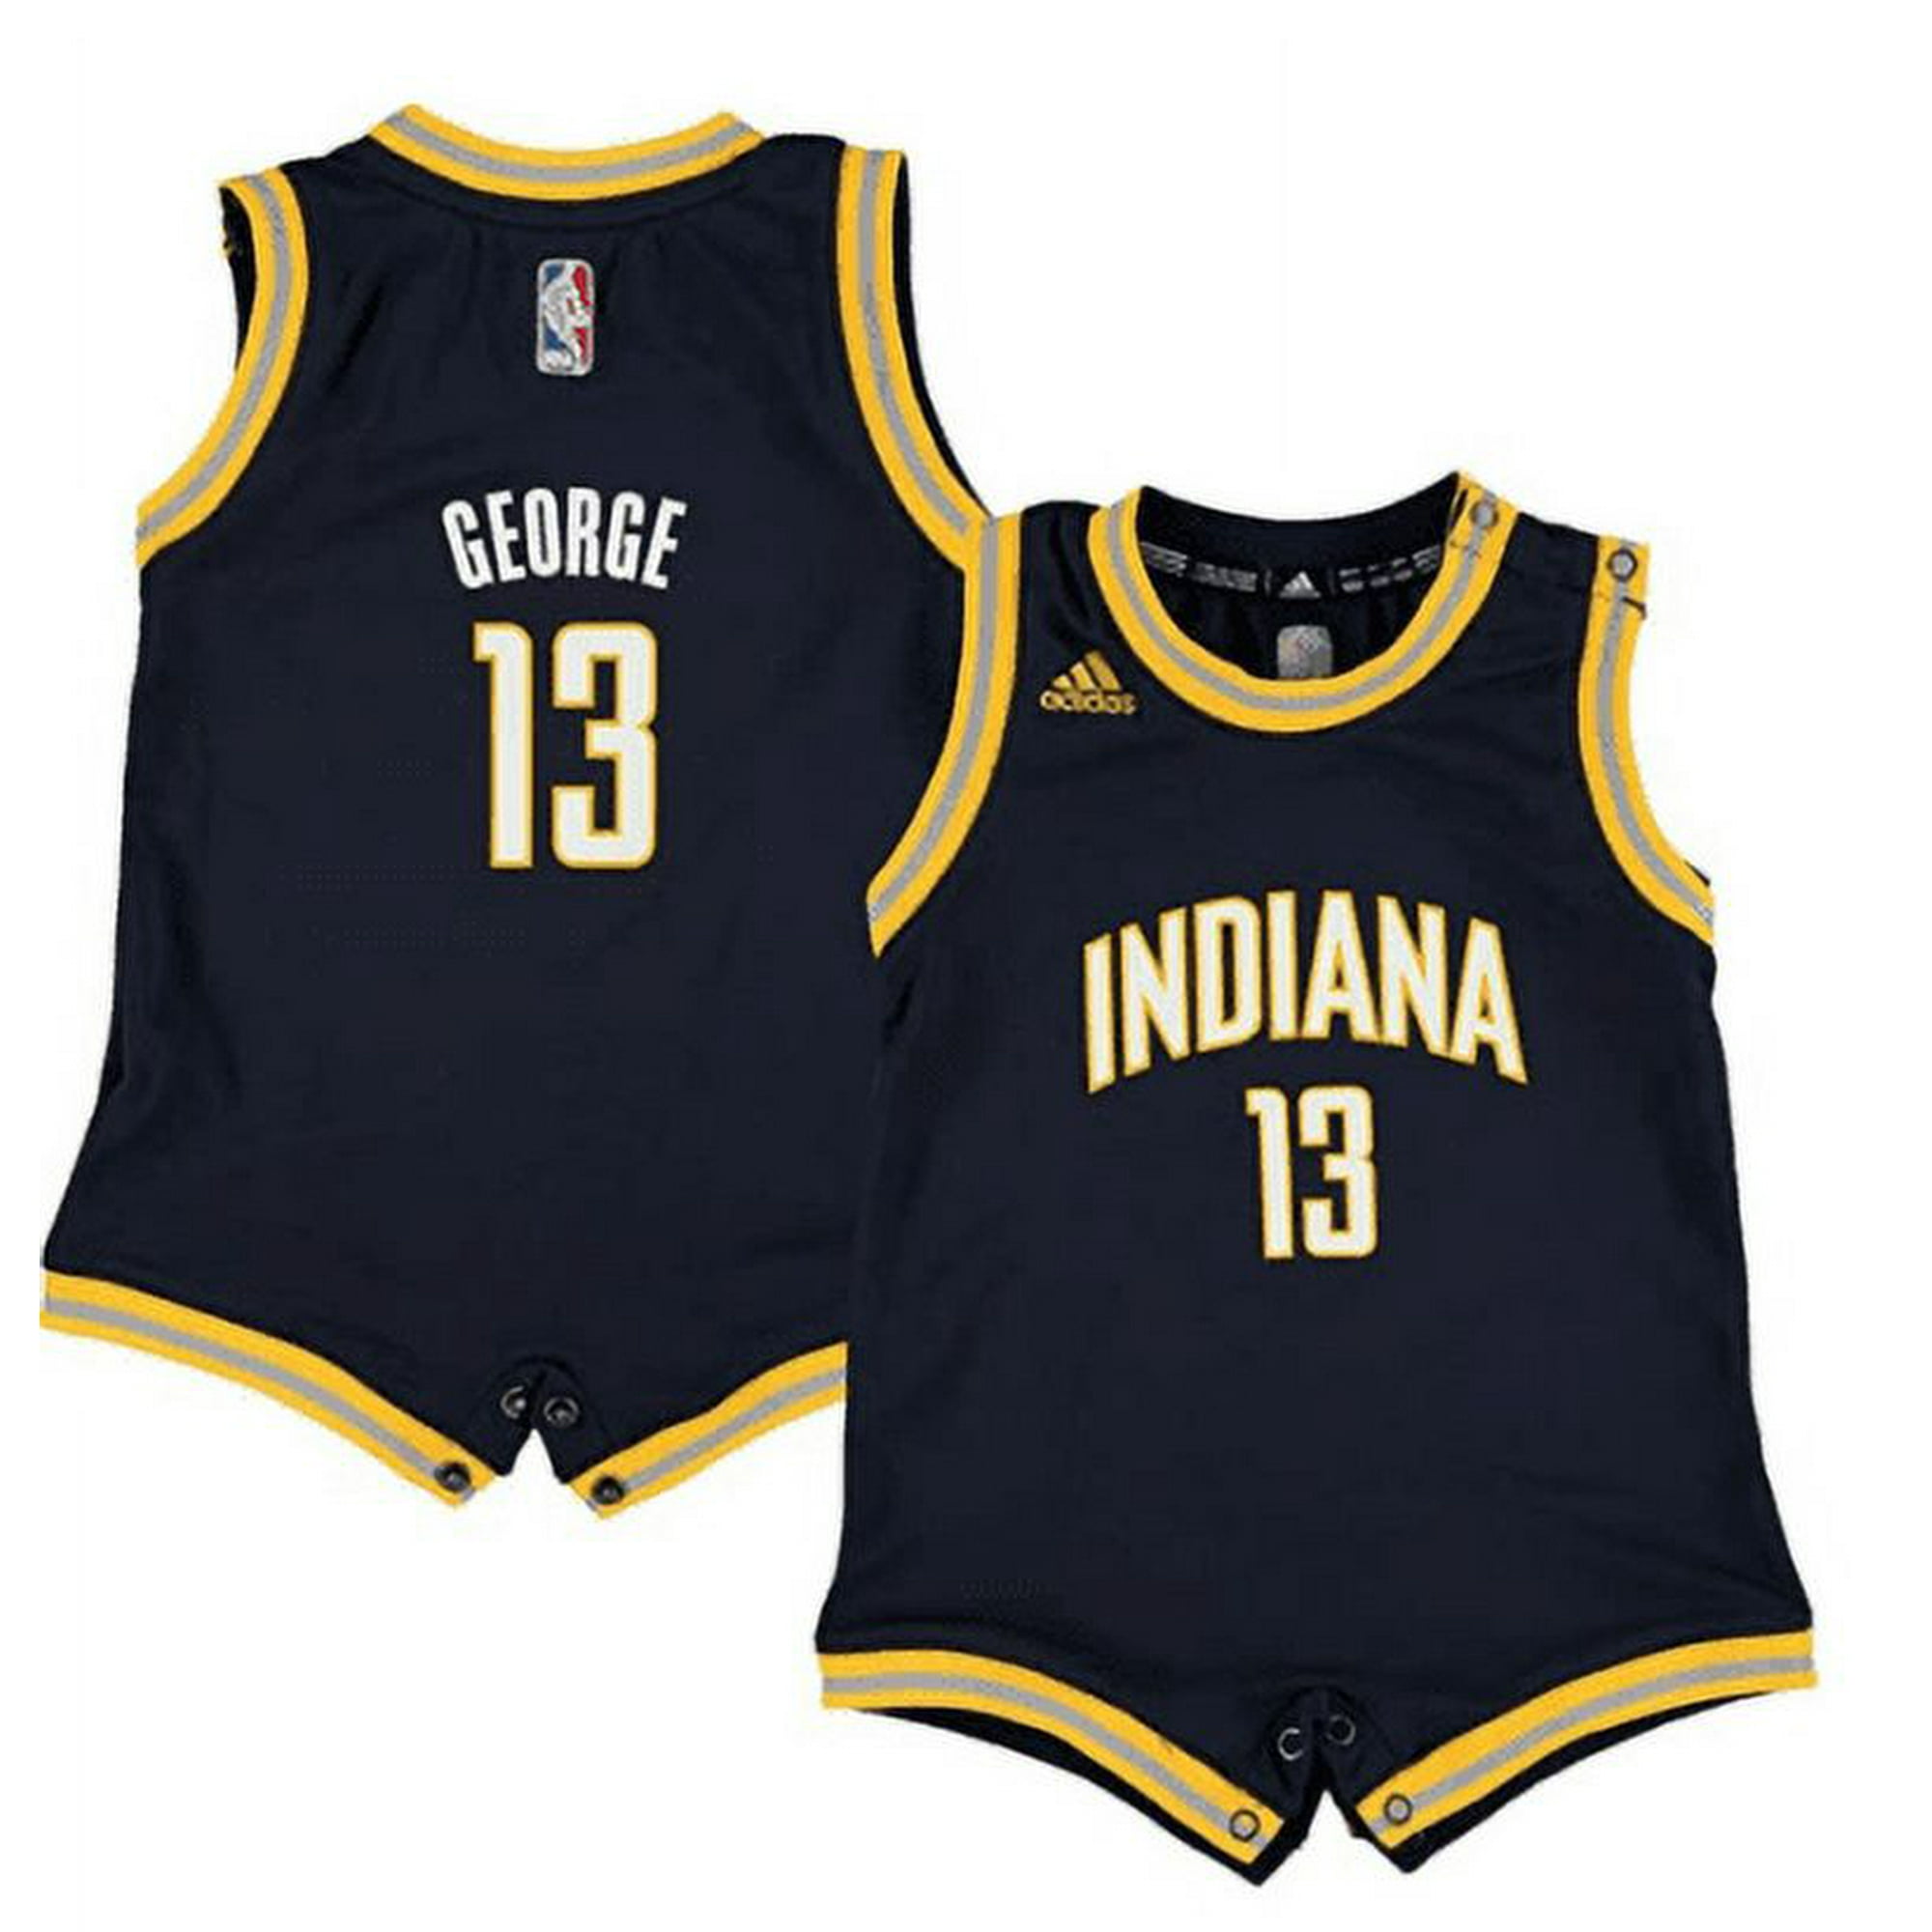 Adidas Indiana Pacers Paul George #13 Basketball Jersey Size S